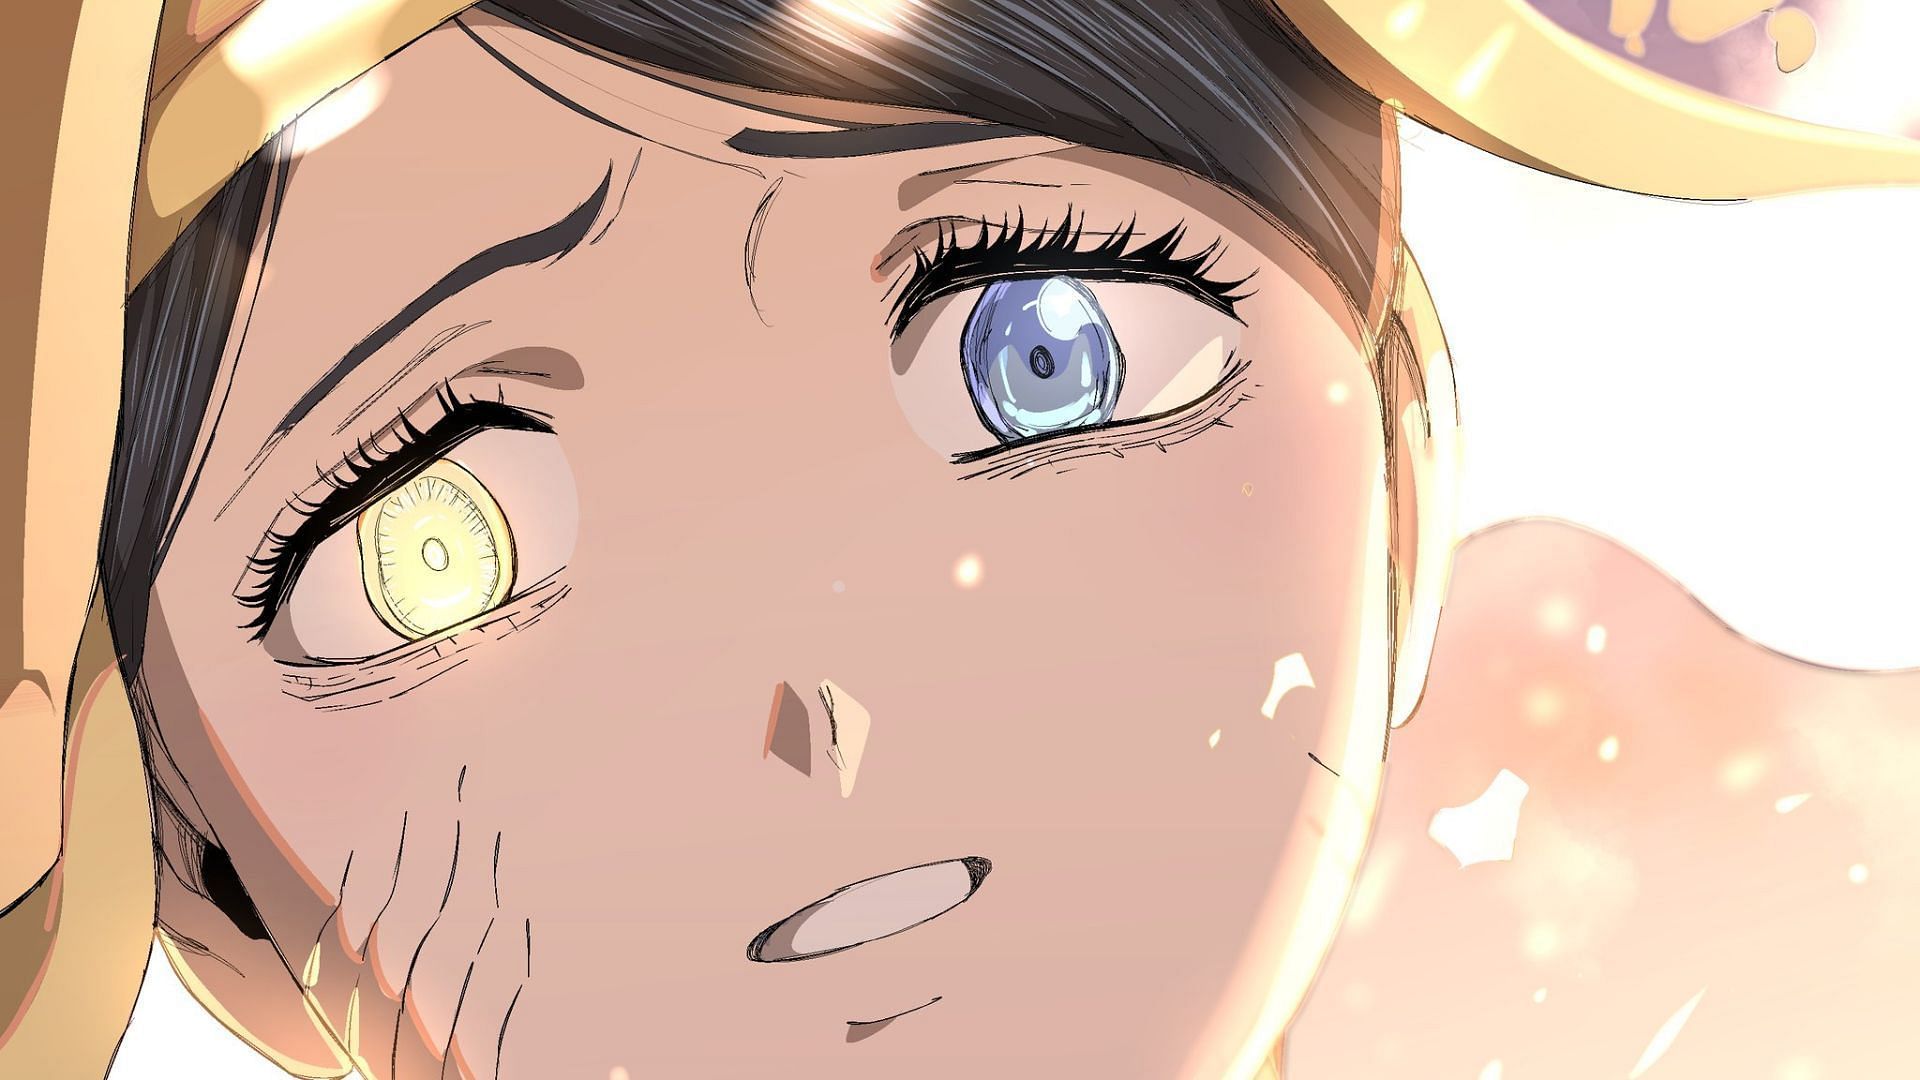 Sister Lily as seen in Black Clover chapter 349 (Image via Twitter/@Derxon2)